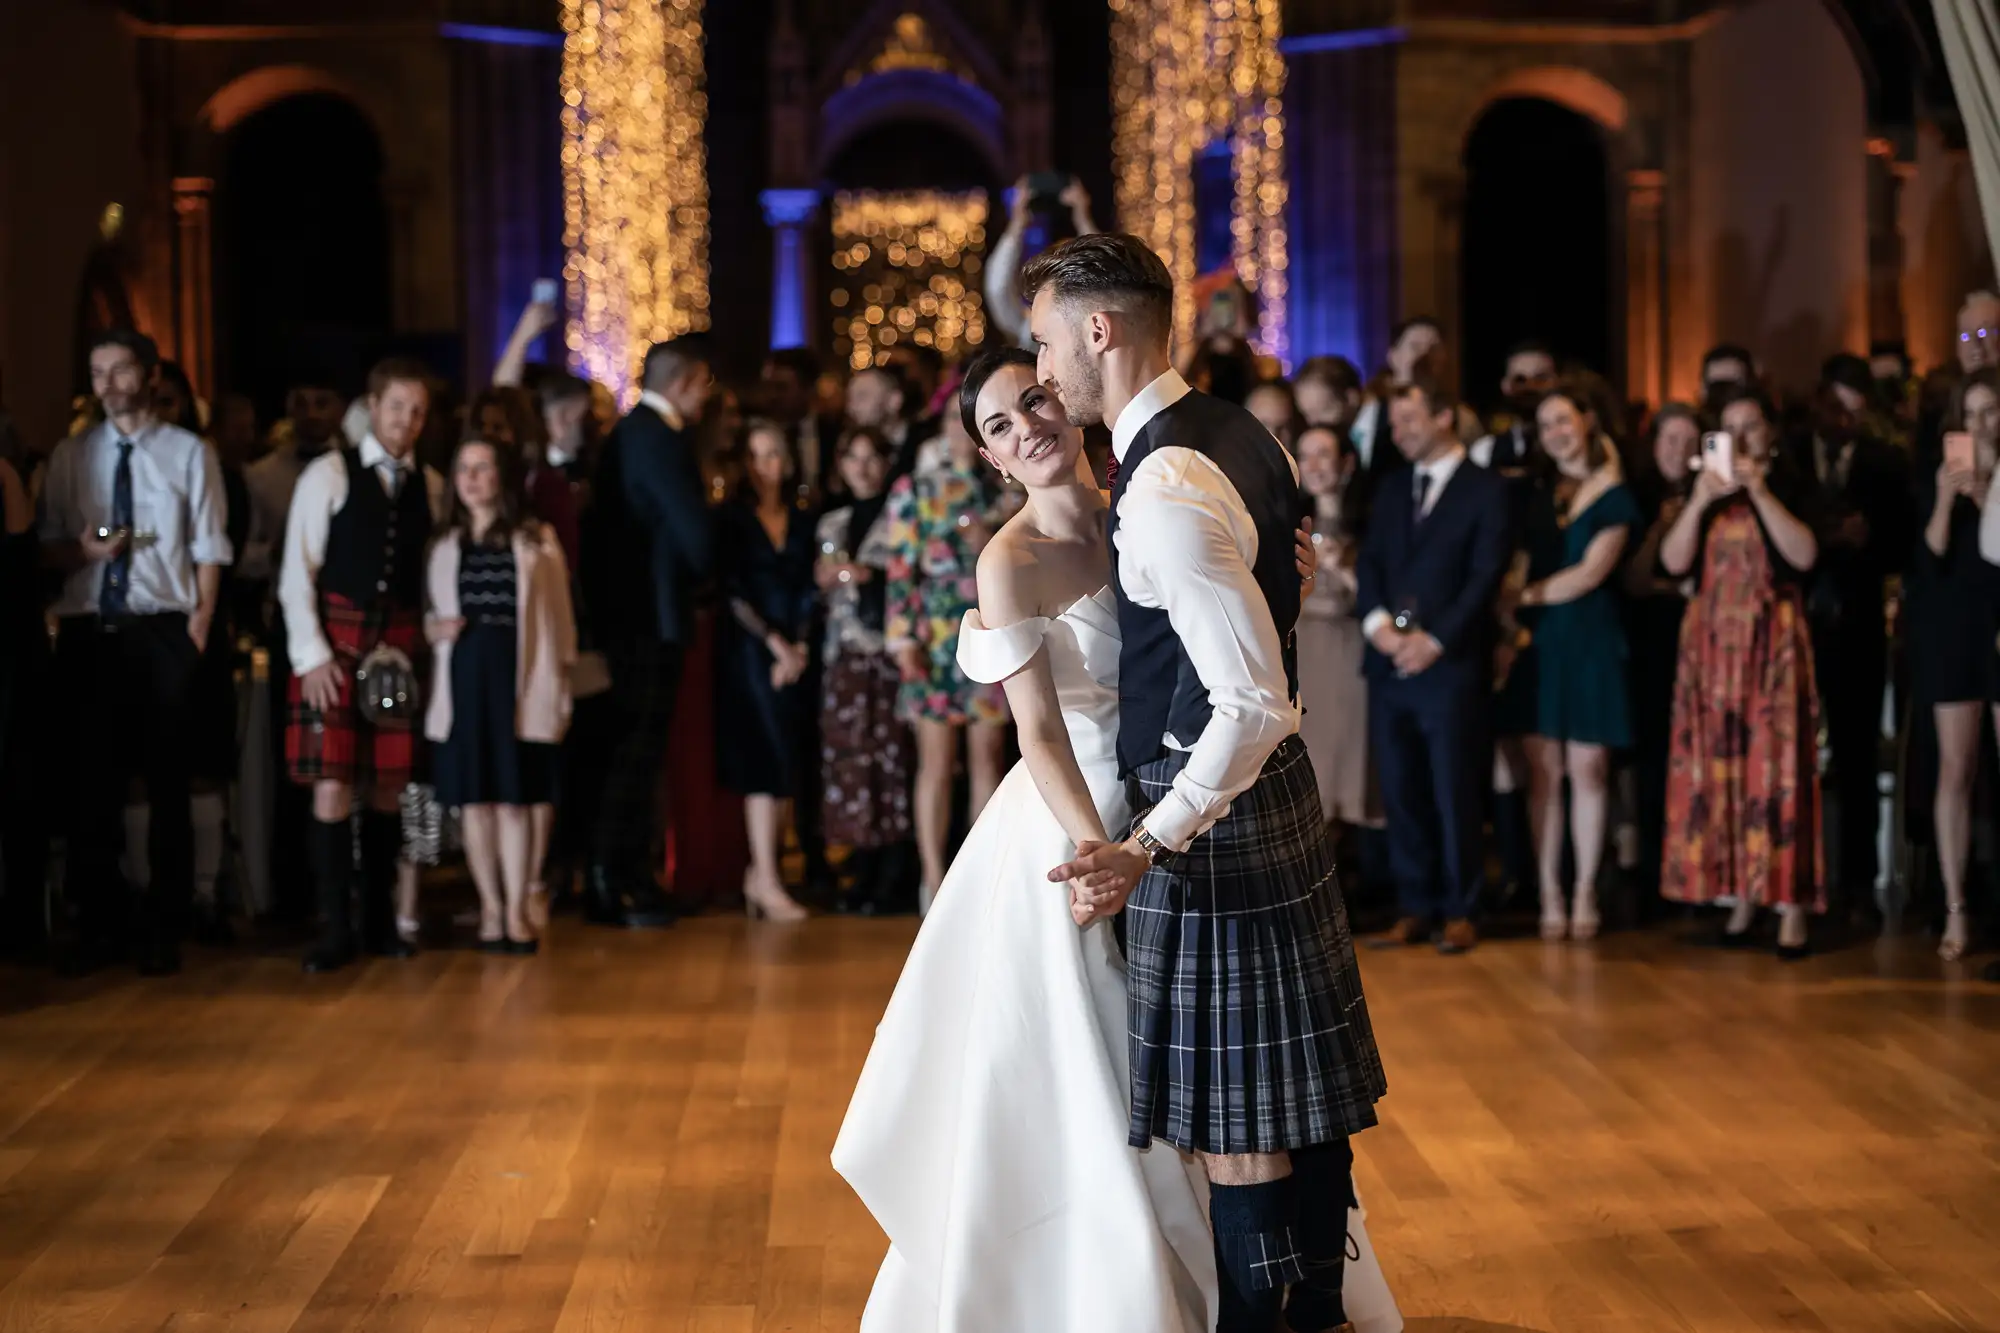 A bride in a white gown and a groom in a kilt share a dance, surrounded by guests in a warmly lit hall.